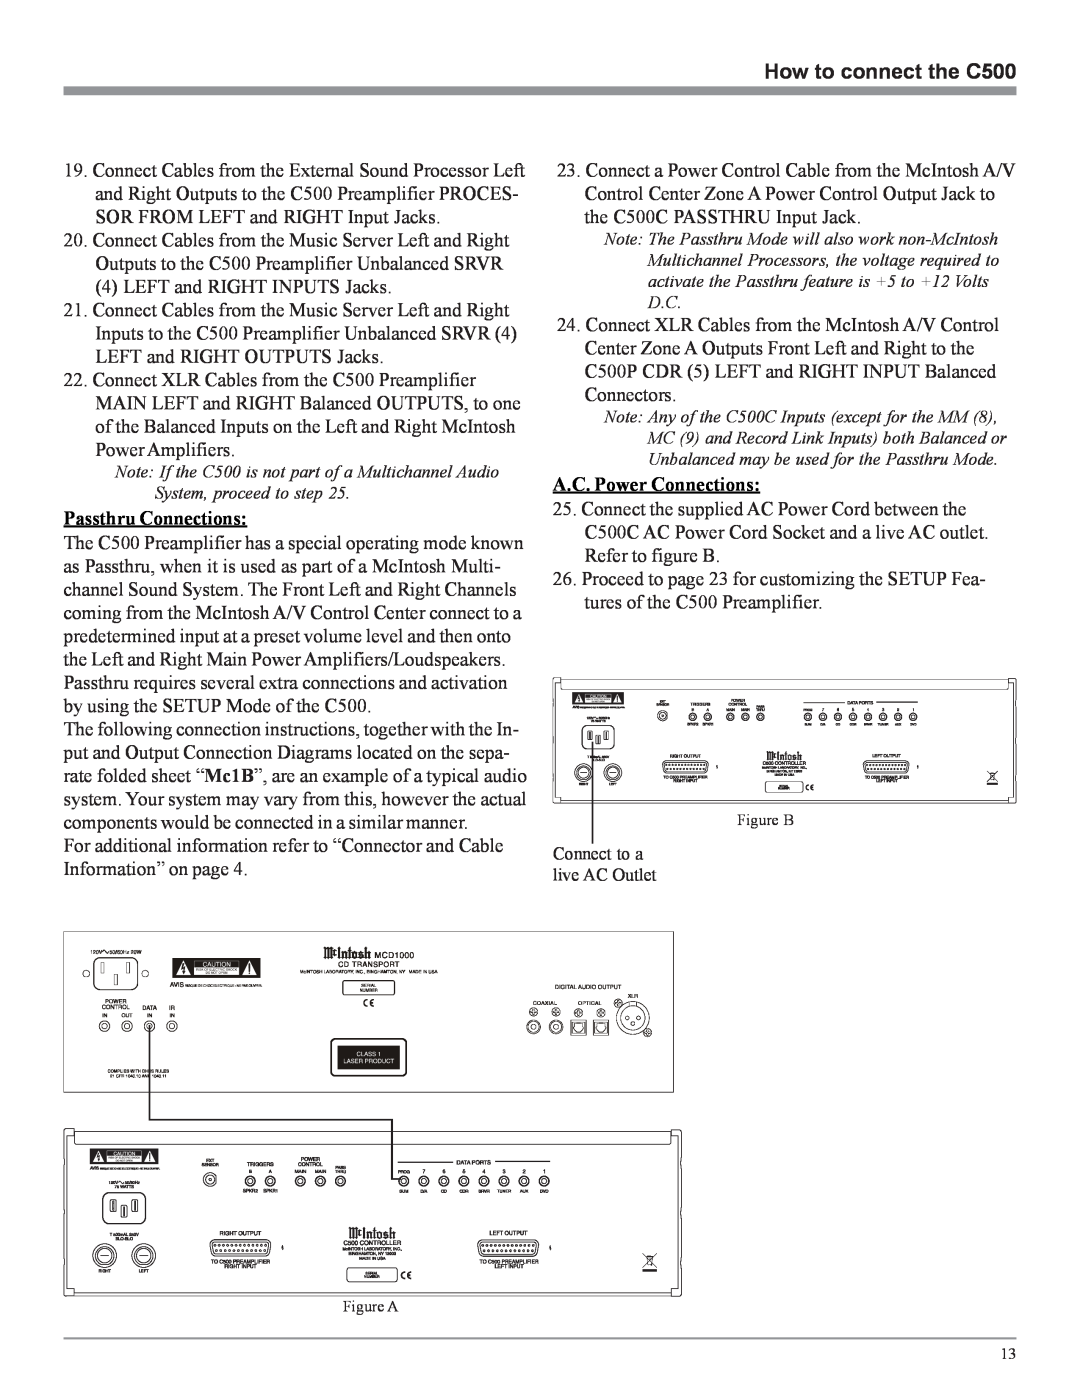 McIntosh owner manual How to connect the C500, Passthru Connections, A.C. Power Connections 